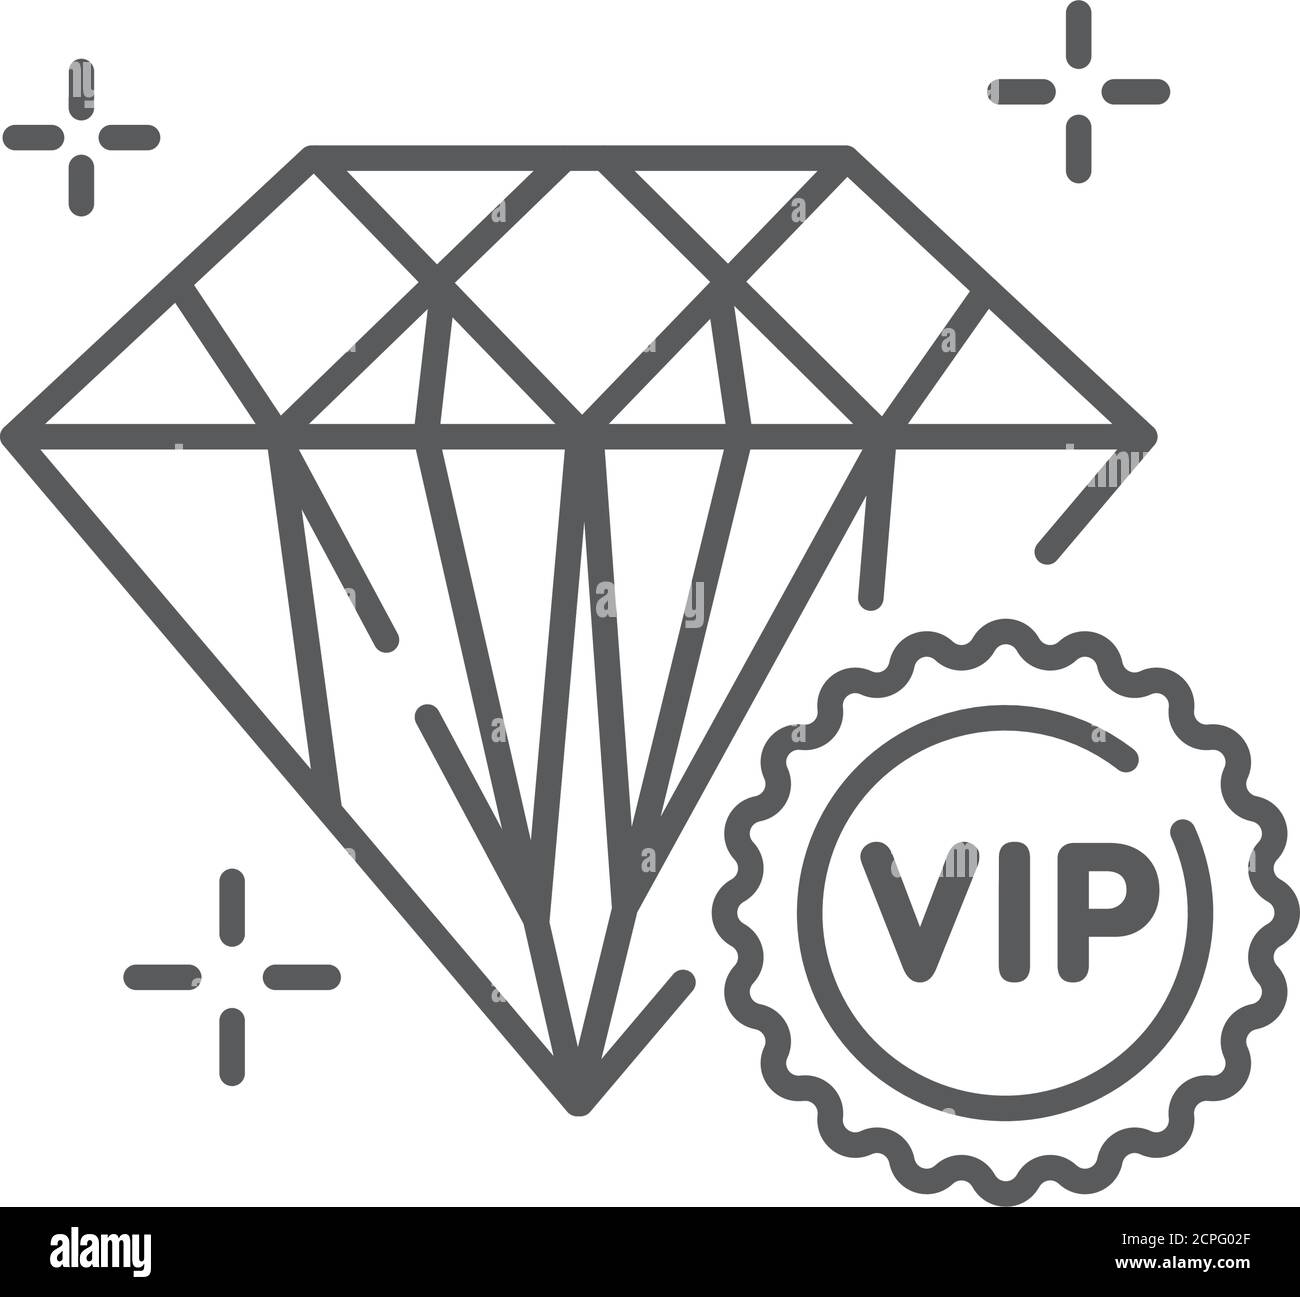 Luxury lifestyle line black icon. Jewelry concept. Vip club. Sign for web page, mobile app, button, logo. Stock Vector